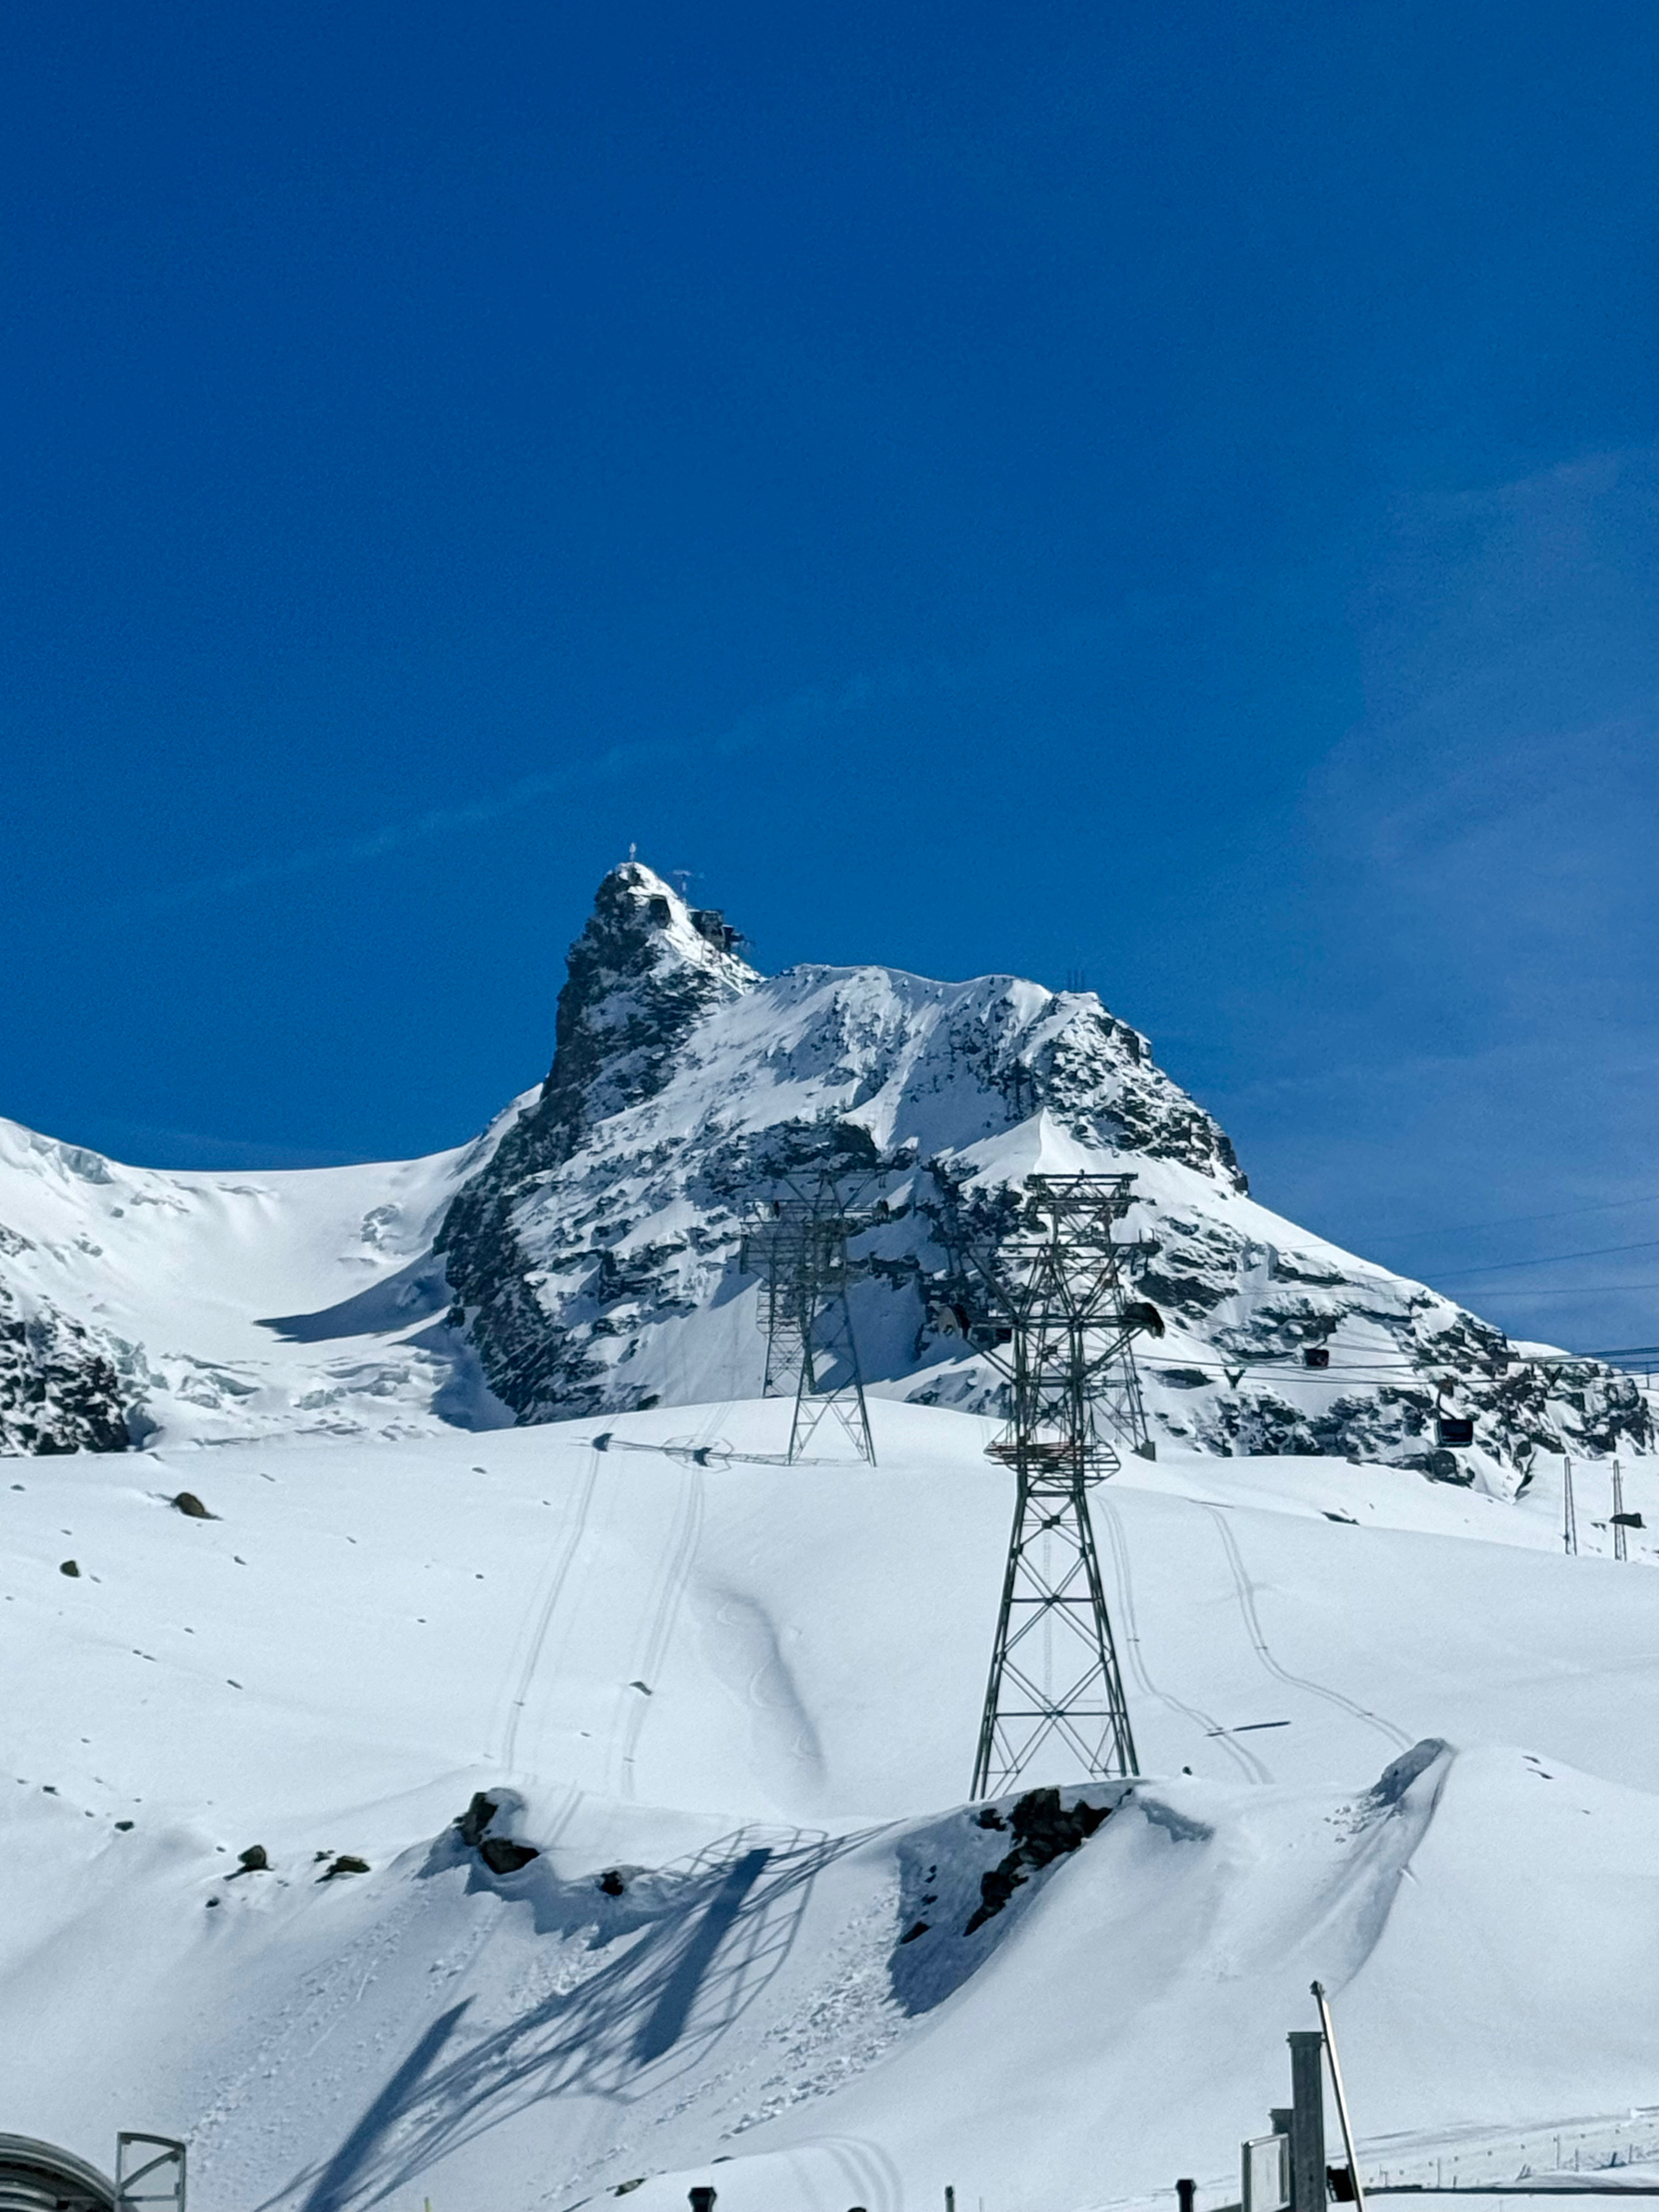 Snow-covered mountain peak against a clear blue sky, with ski tracks, electricity pylons, and a partial view of a lift station at the base.